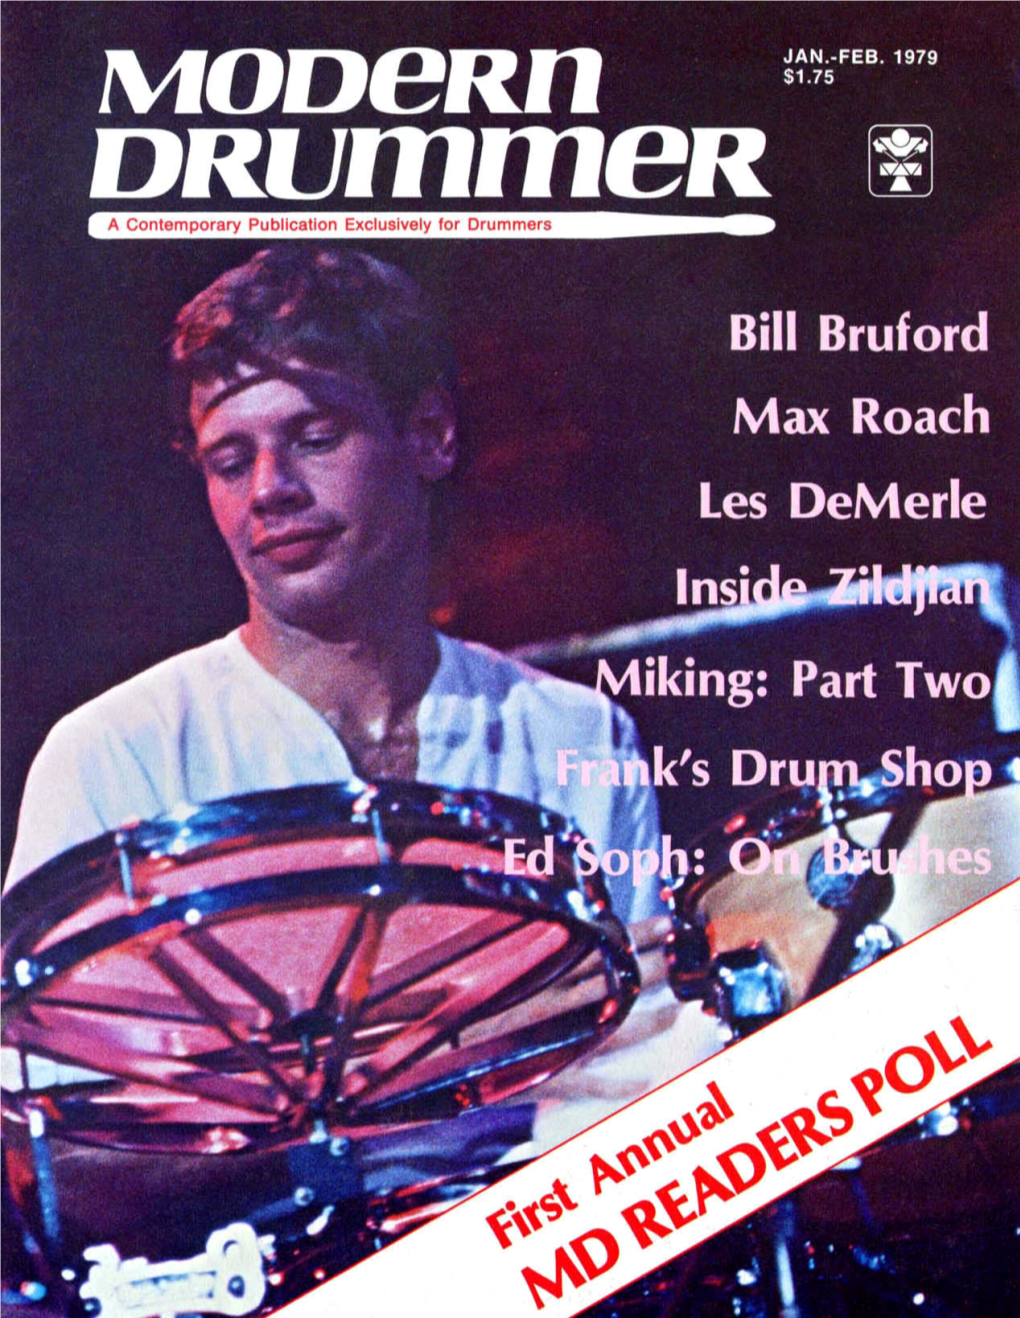 FRANK's DRUM SHOP 24 Nouncements, There Will Be Six Issues This LES Demerle: up Front 27 Year, One Every Other Month